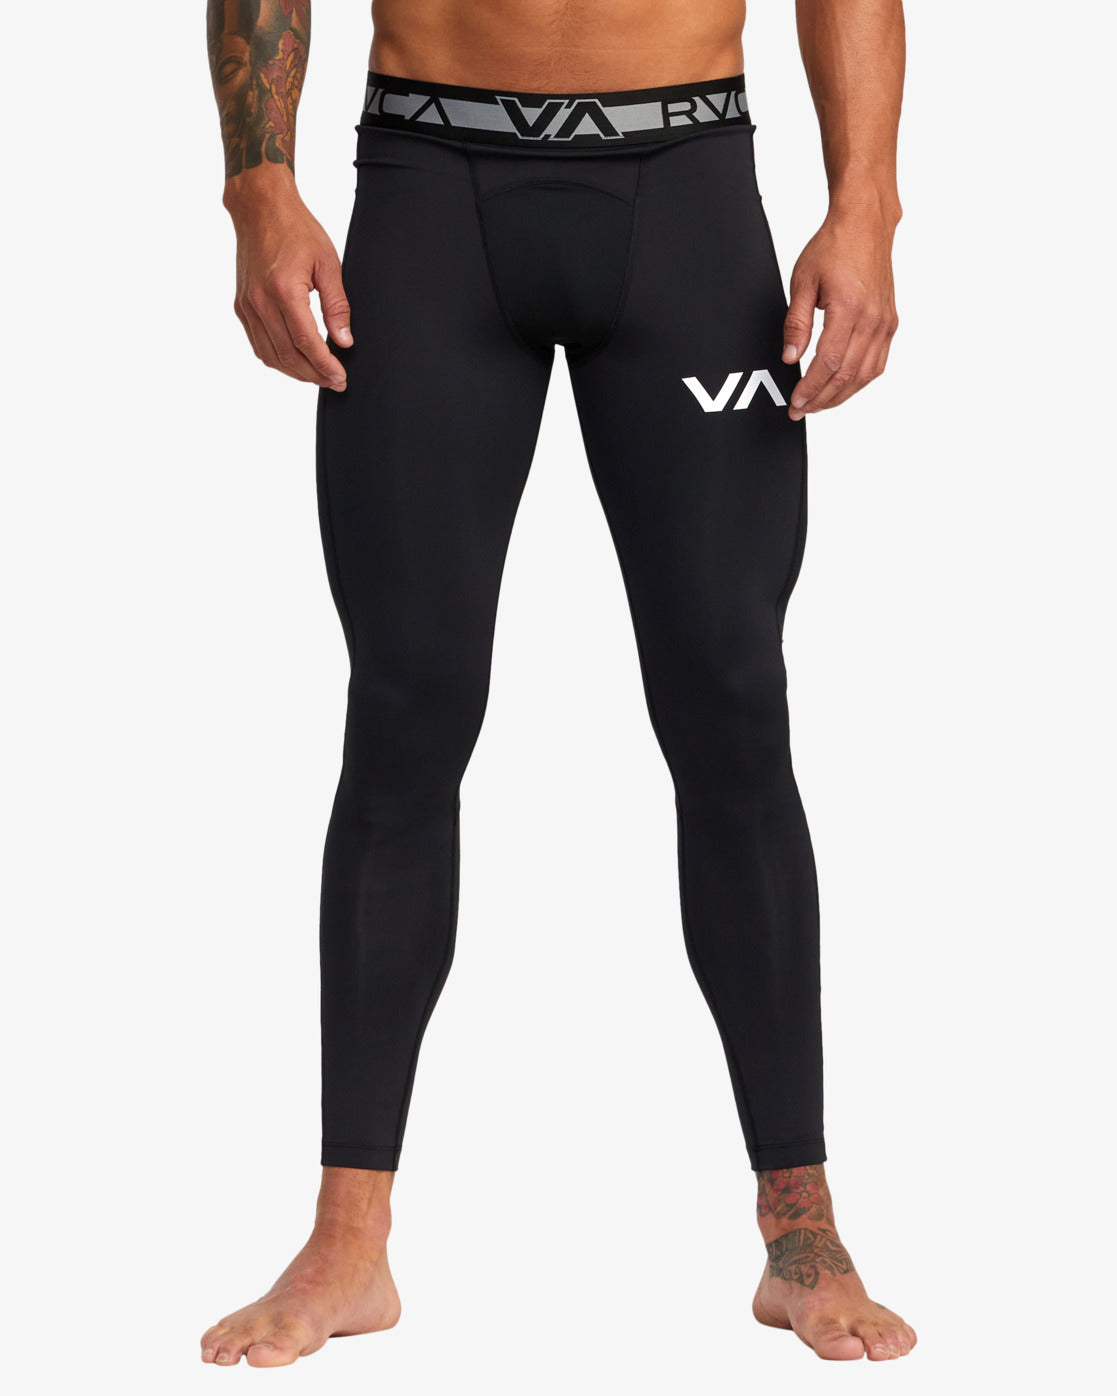 Do Compression Leggings Help You Lose Weight? – solowomen